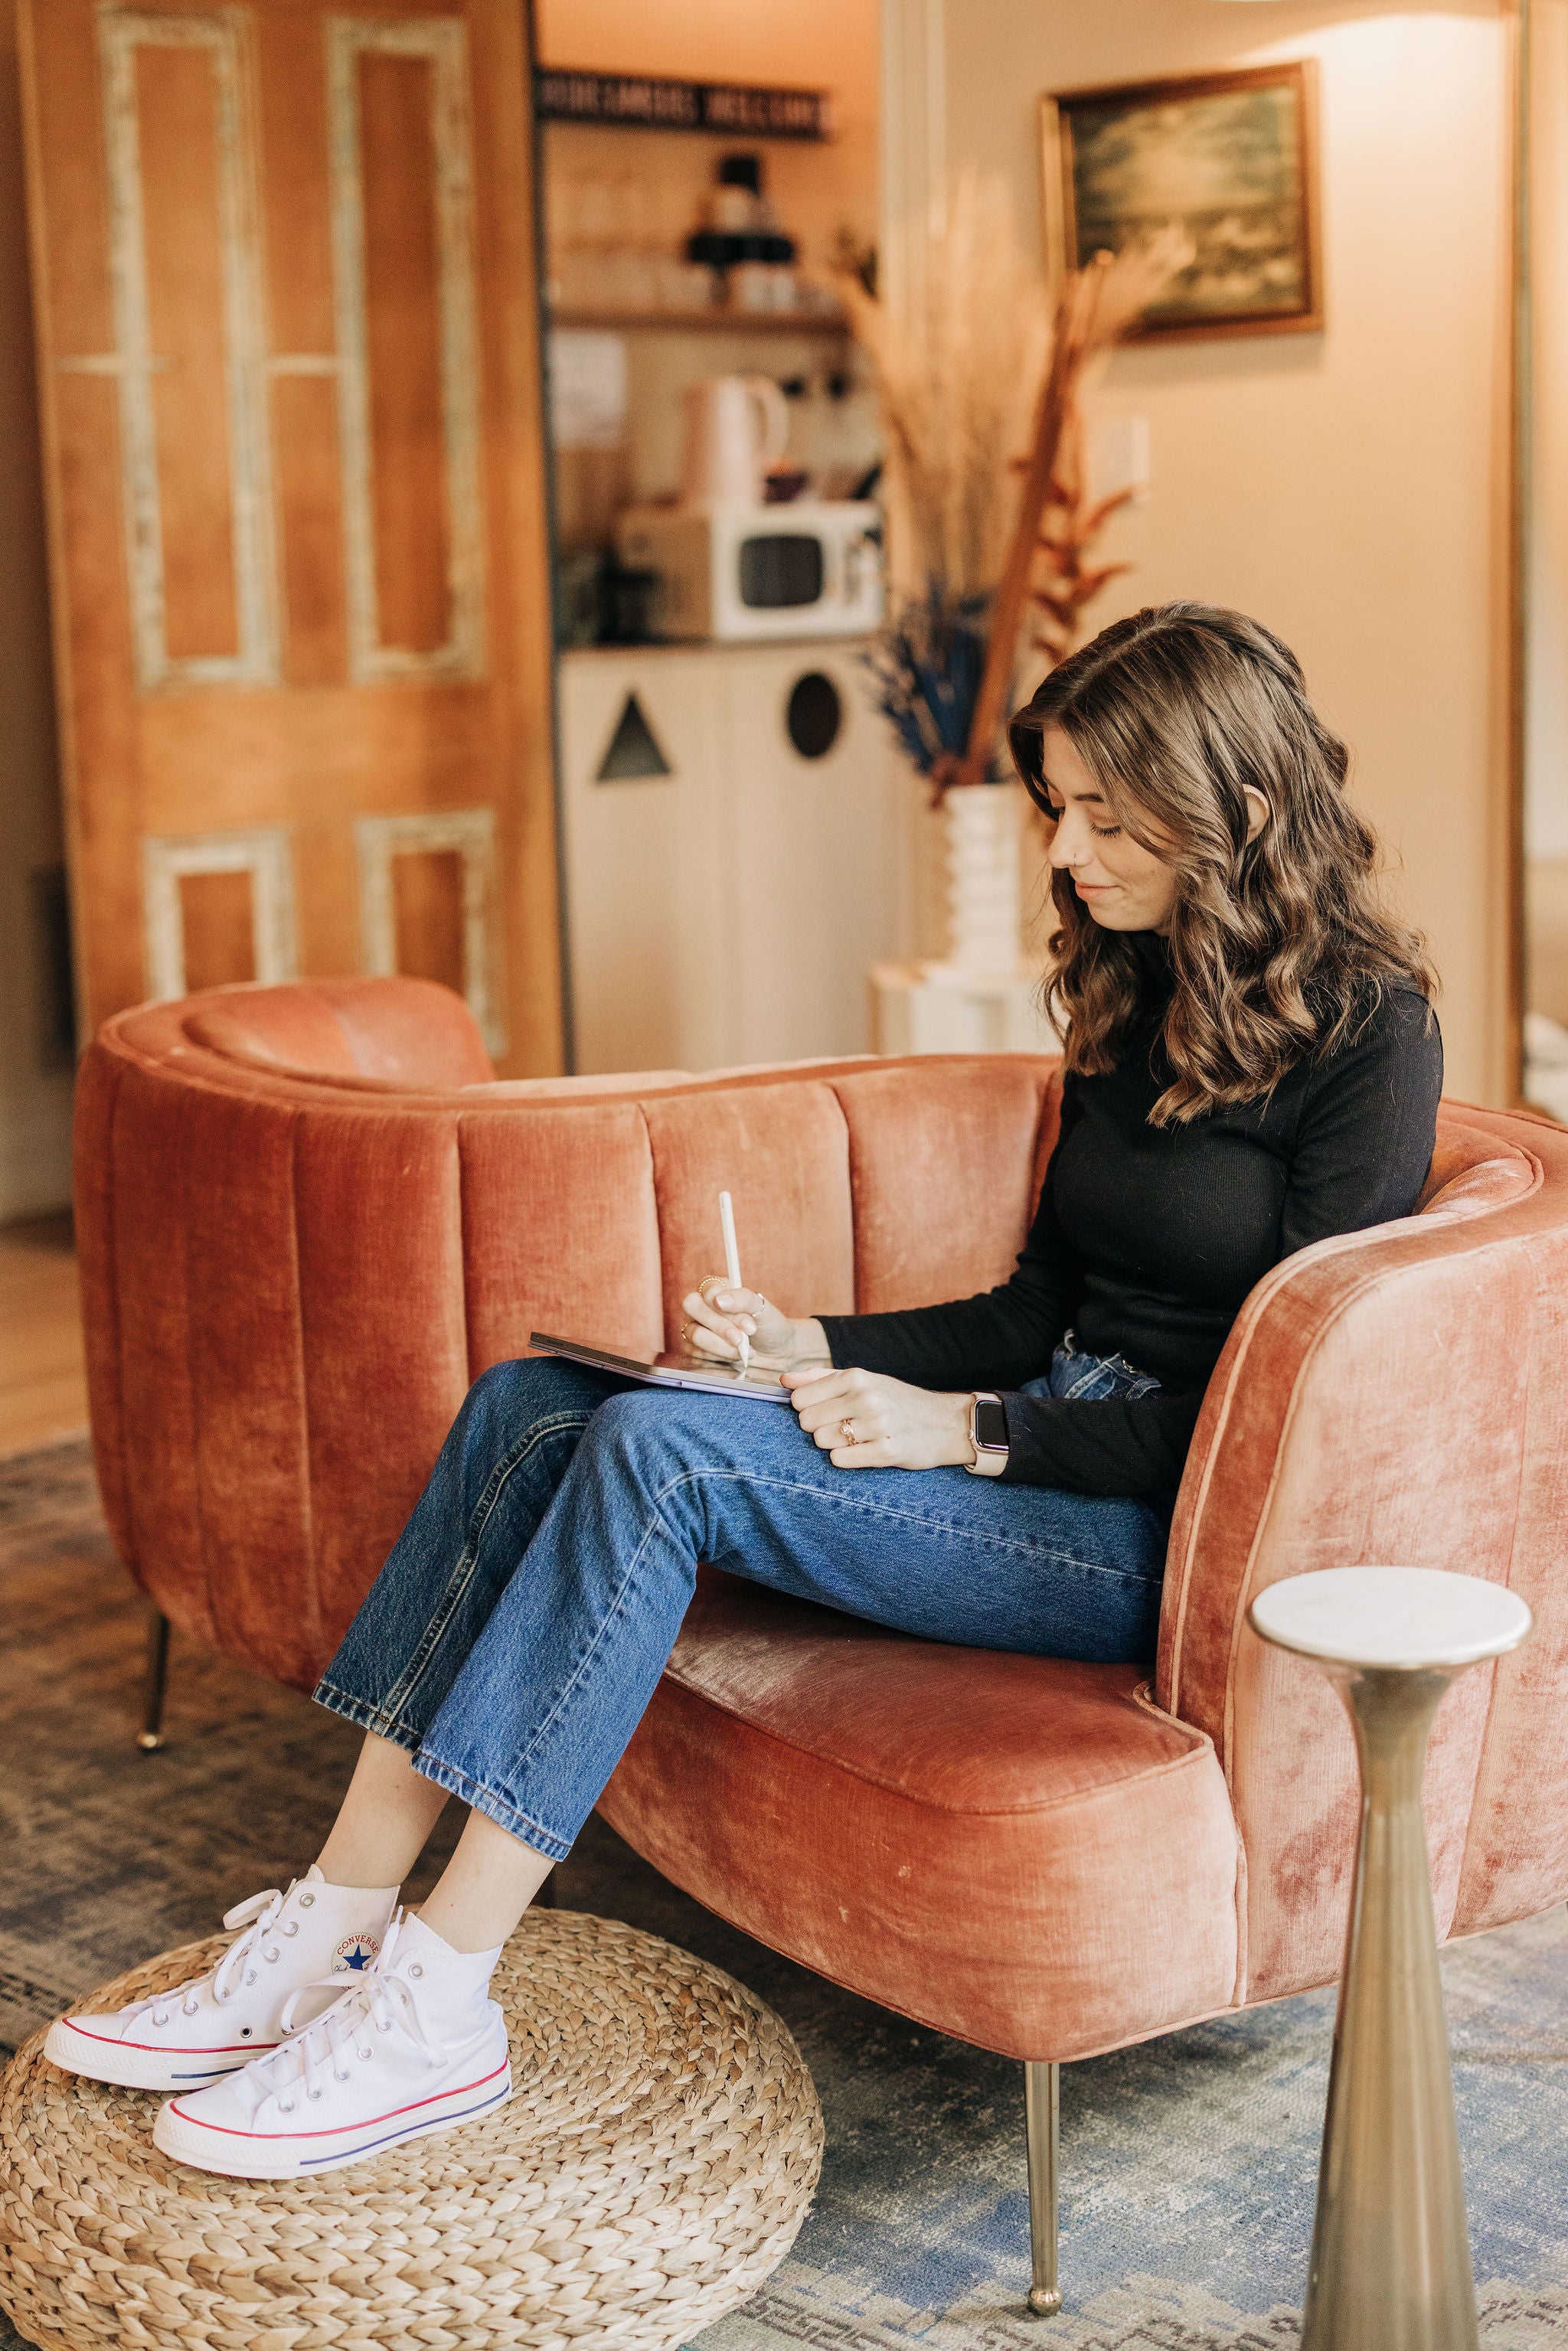 Kirstin from KDigitalStudio is sitting on a pink conversation couch. She has her feet propped up on a boho poof and has her iPad in her lap. She is wearing a black turtleneck, vintage blue jeans, and white Converse hightops.